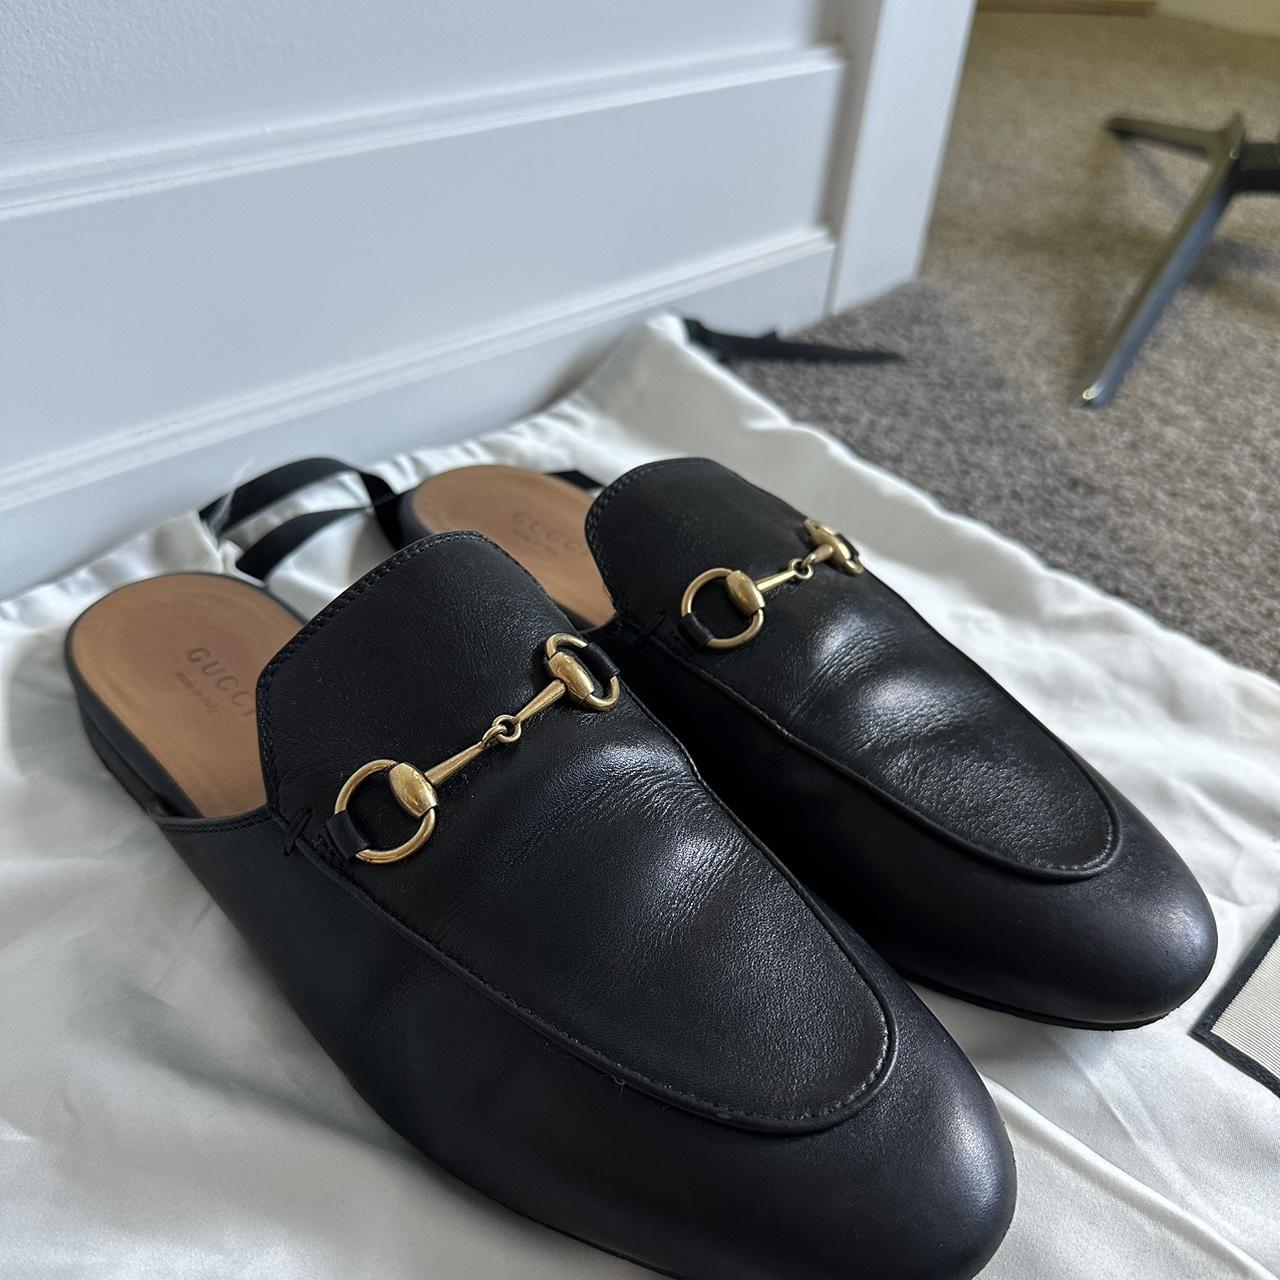 GUCCI Princetown leather slipper size 38 Comes with... - Depop